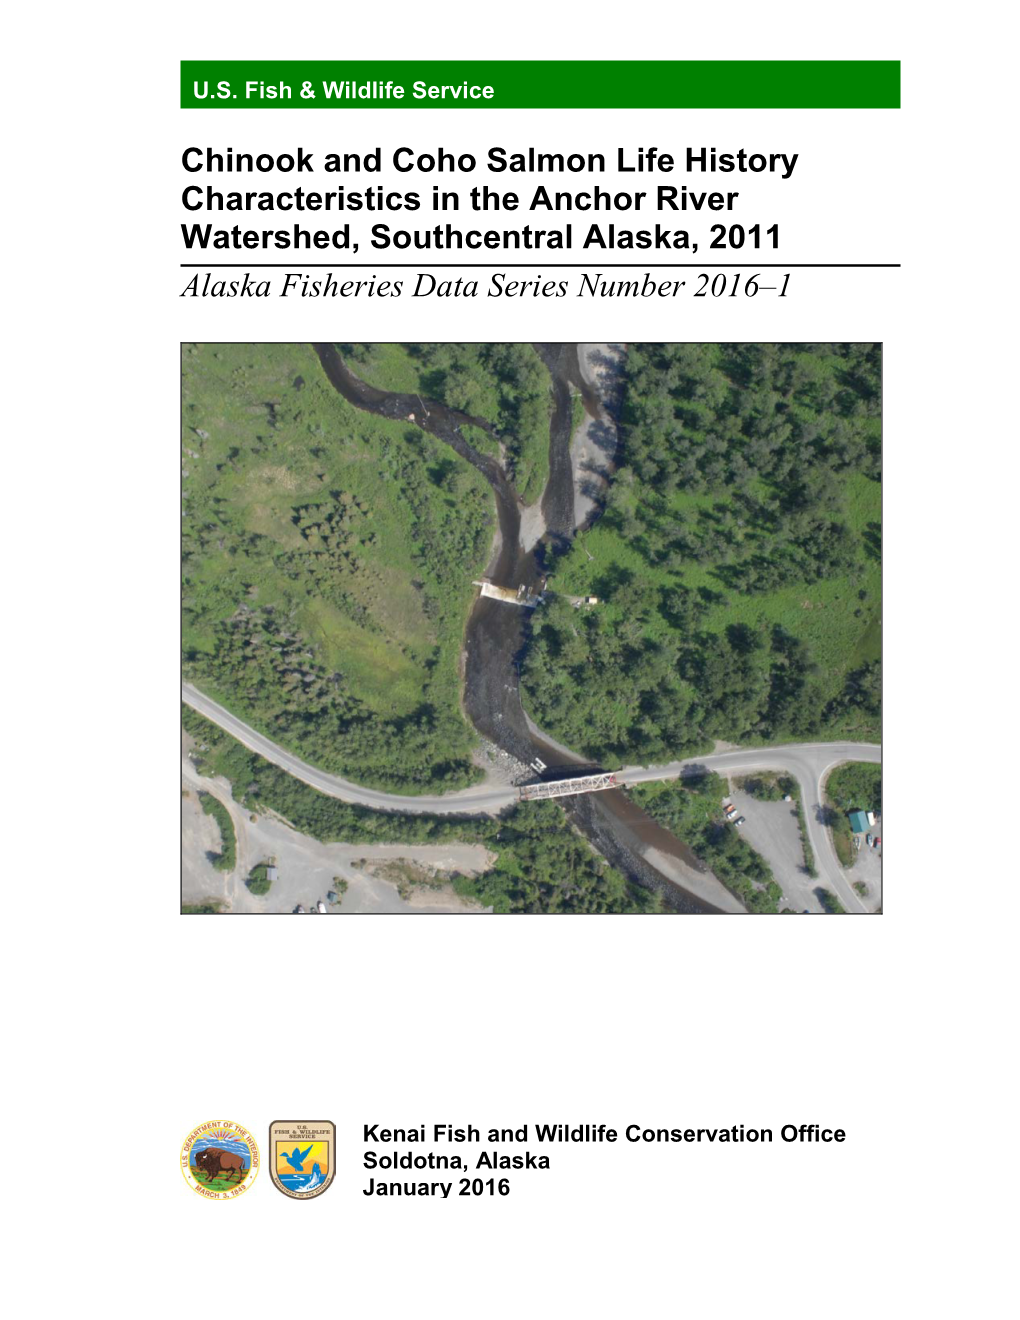 Chinook and Coho Salmon Life History Characteristics in the Anchor River Watershed, Southcentral Alaska, 2011 Alaska Fisheries Data Series Number 2016–1